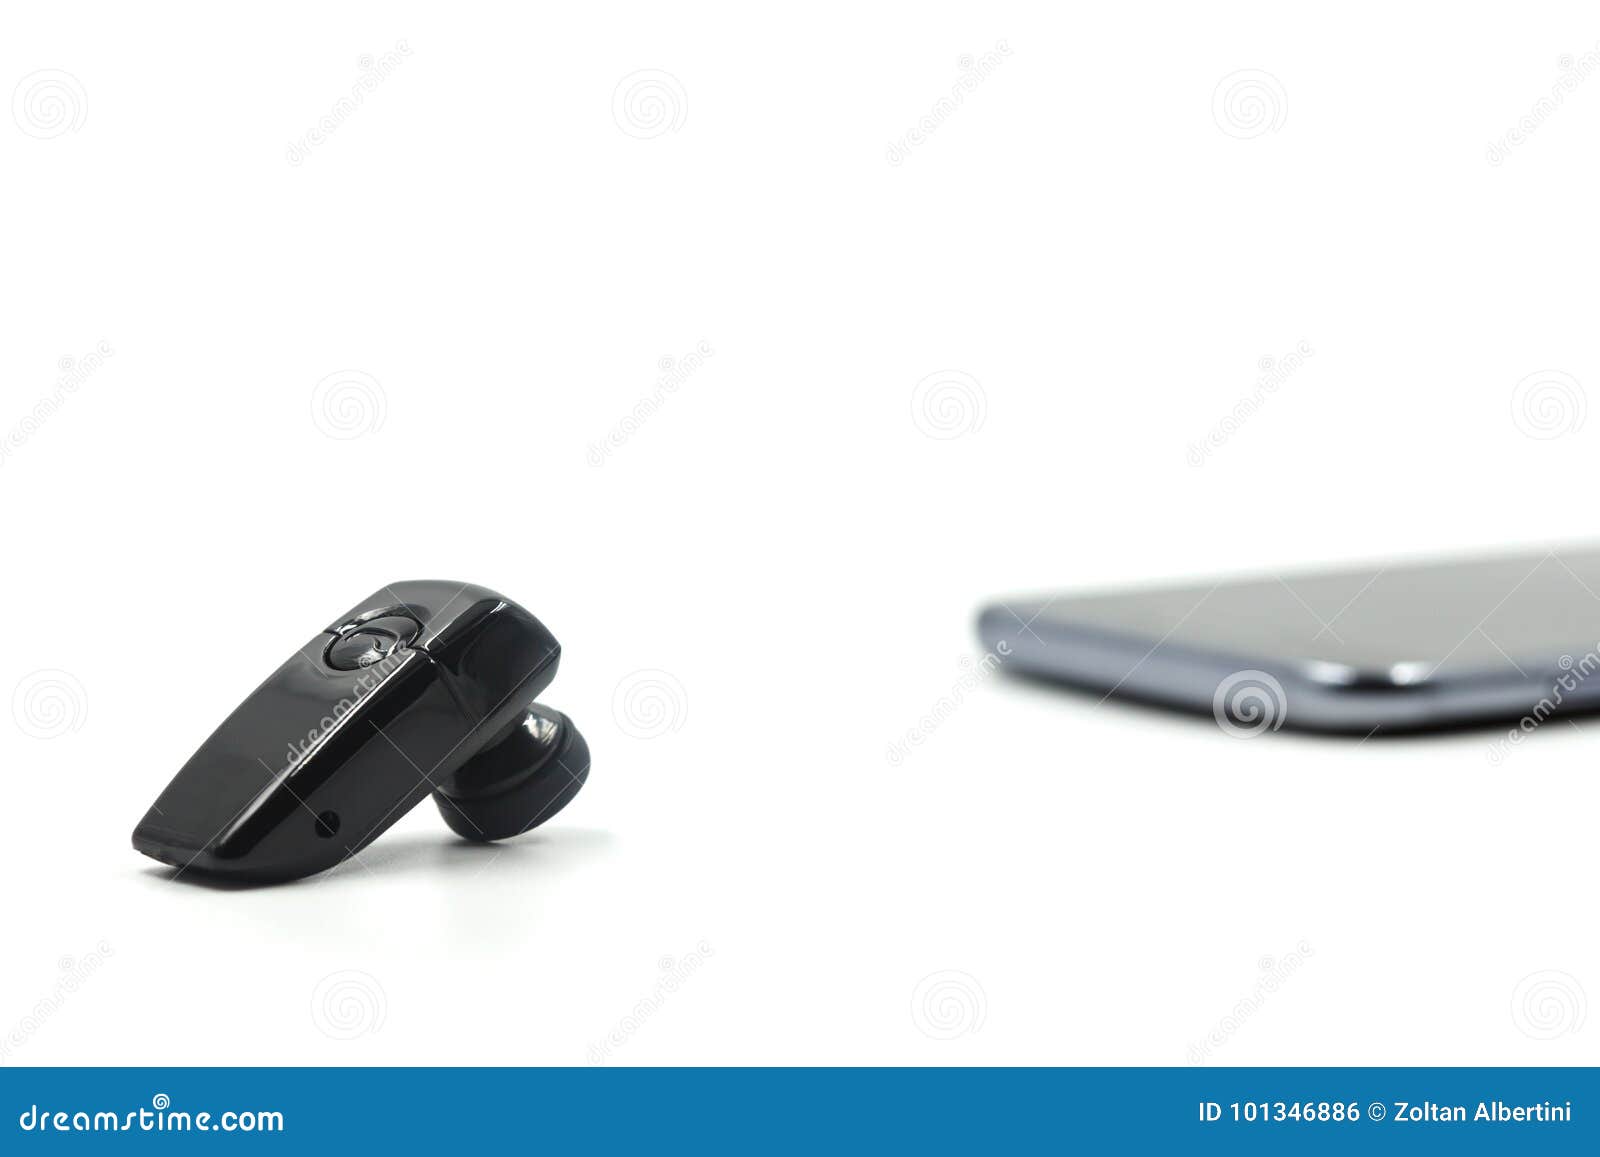 Mobile phone stock photo. Image of cord - 101346886